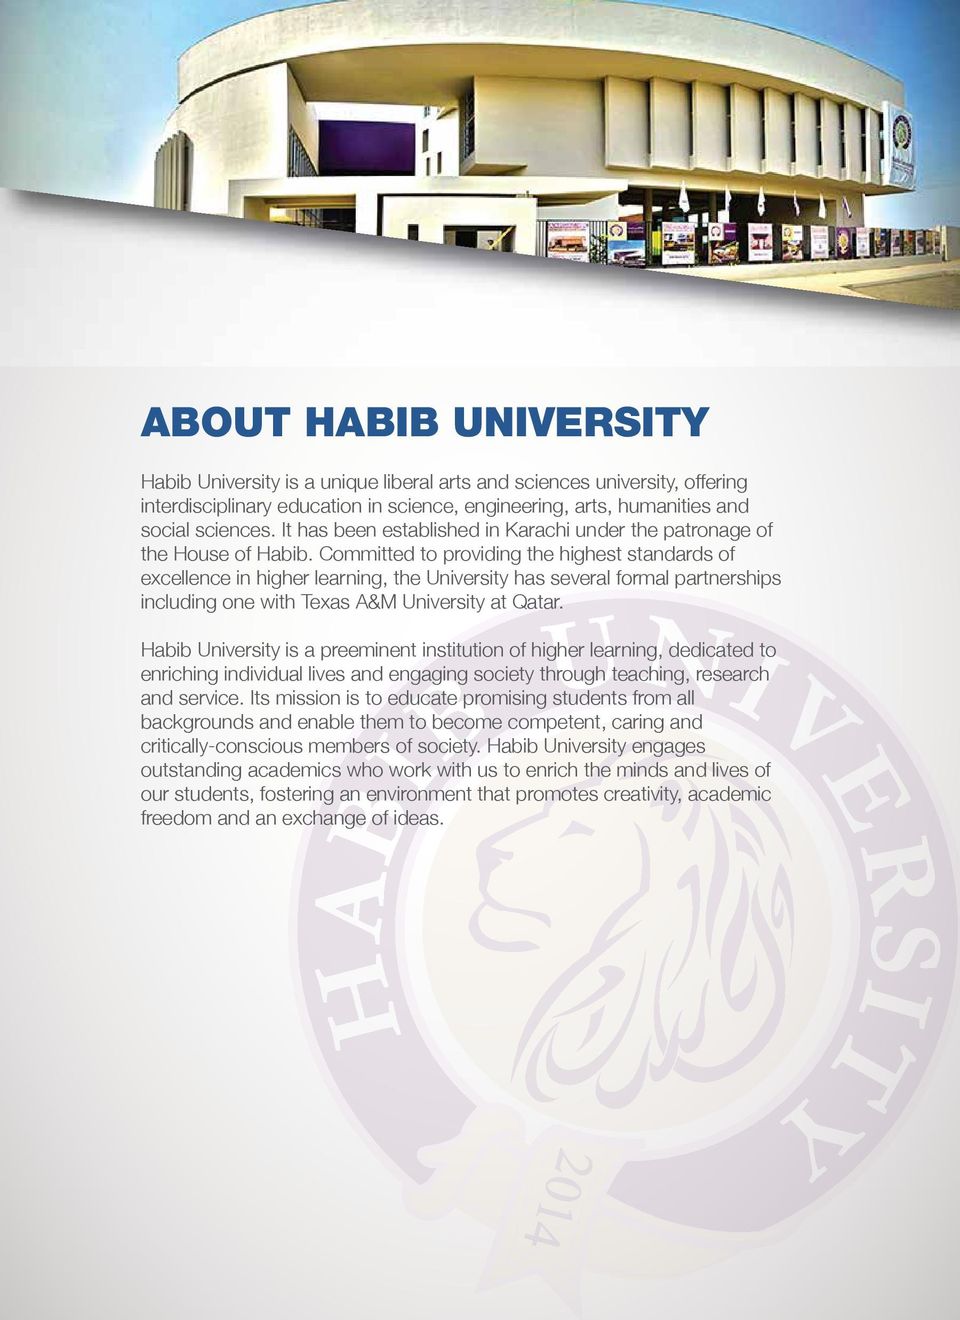 Committed to providing the highest standards of excellence in higher learning, the University has several formal partnerships including one with Texas A&M University at Qatar.